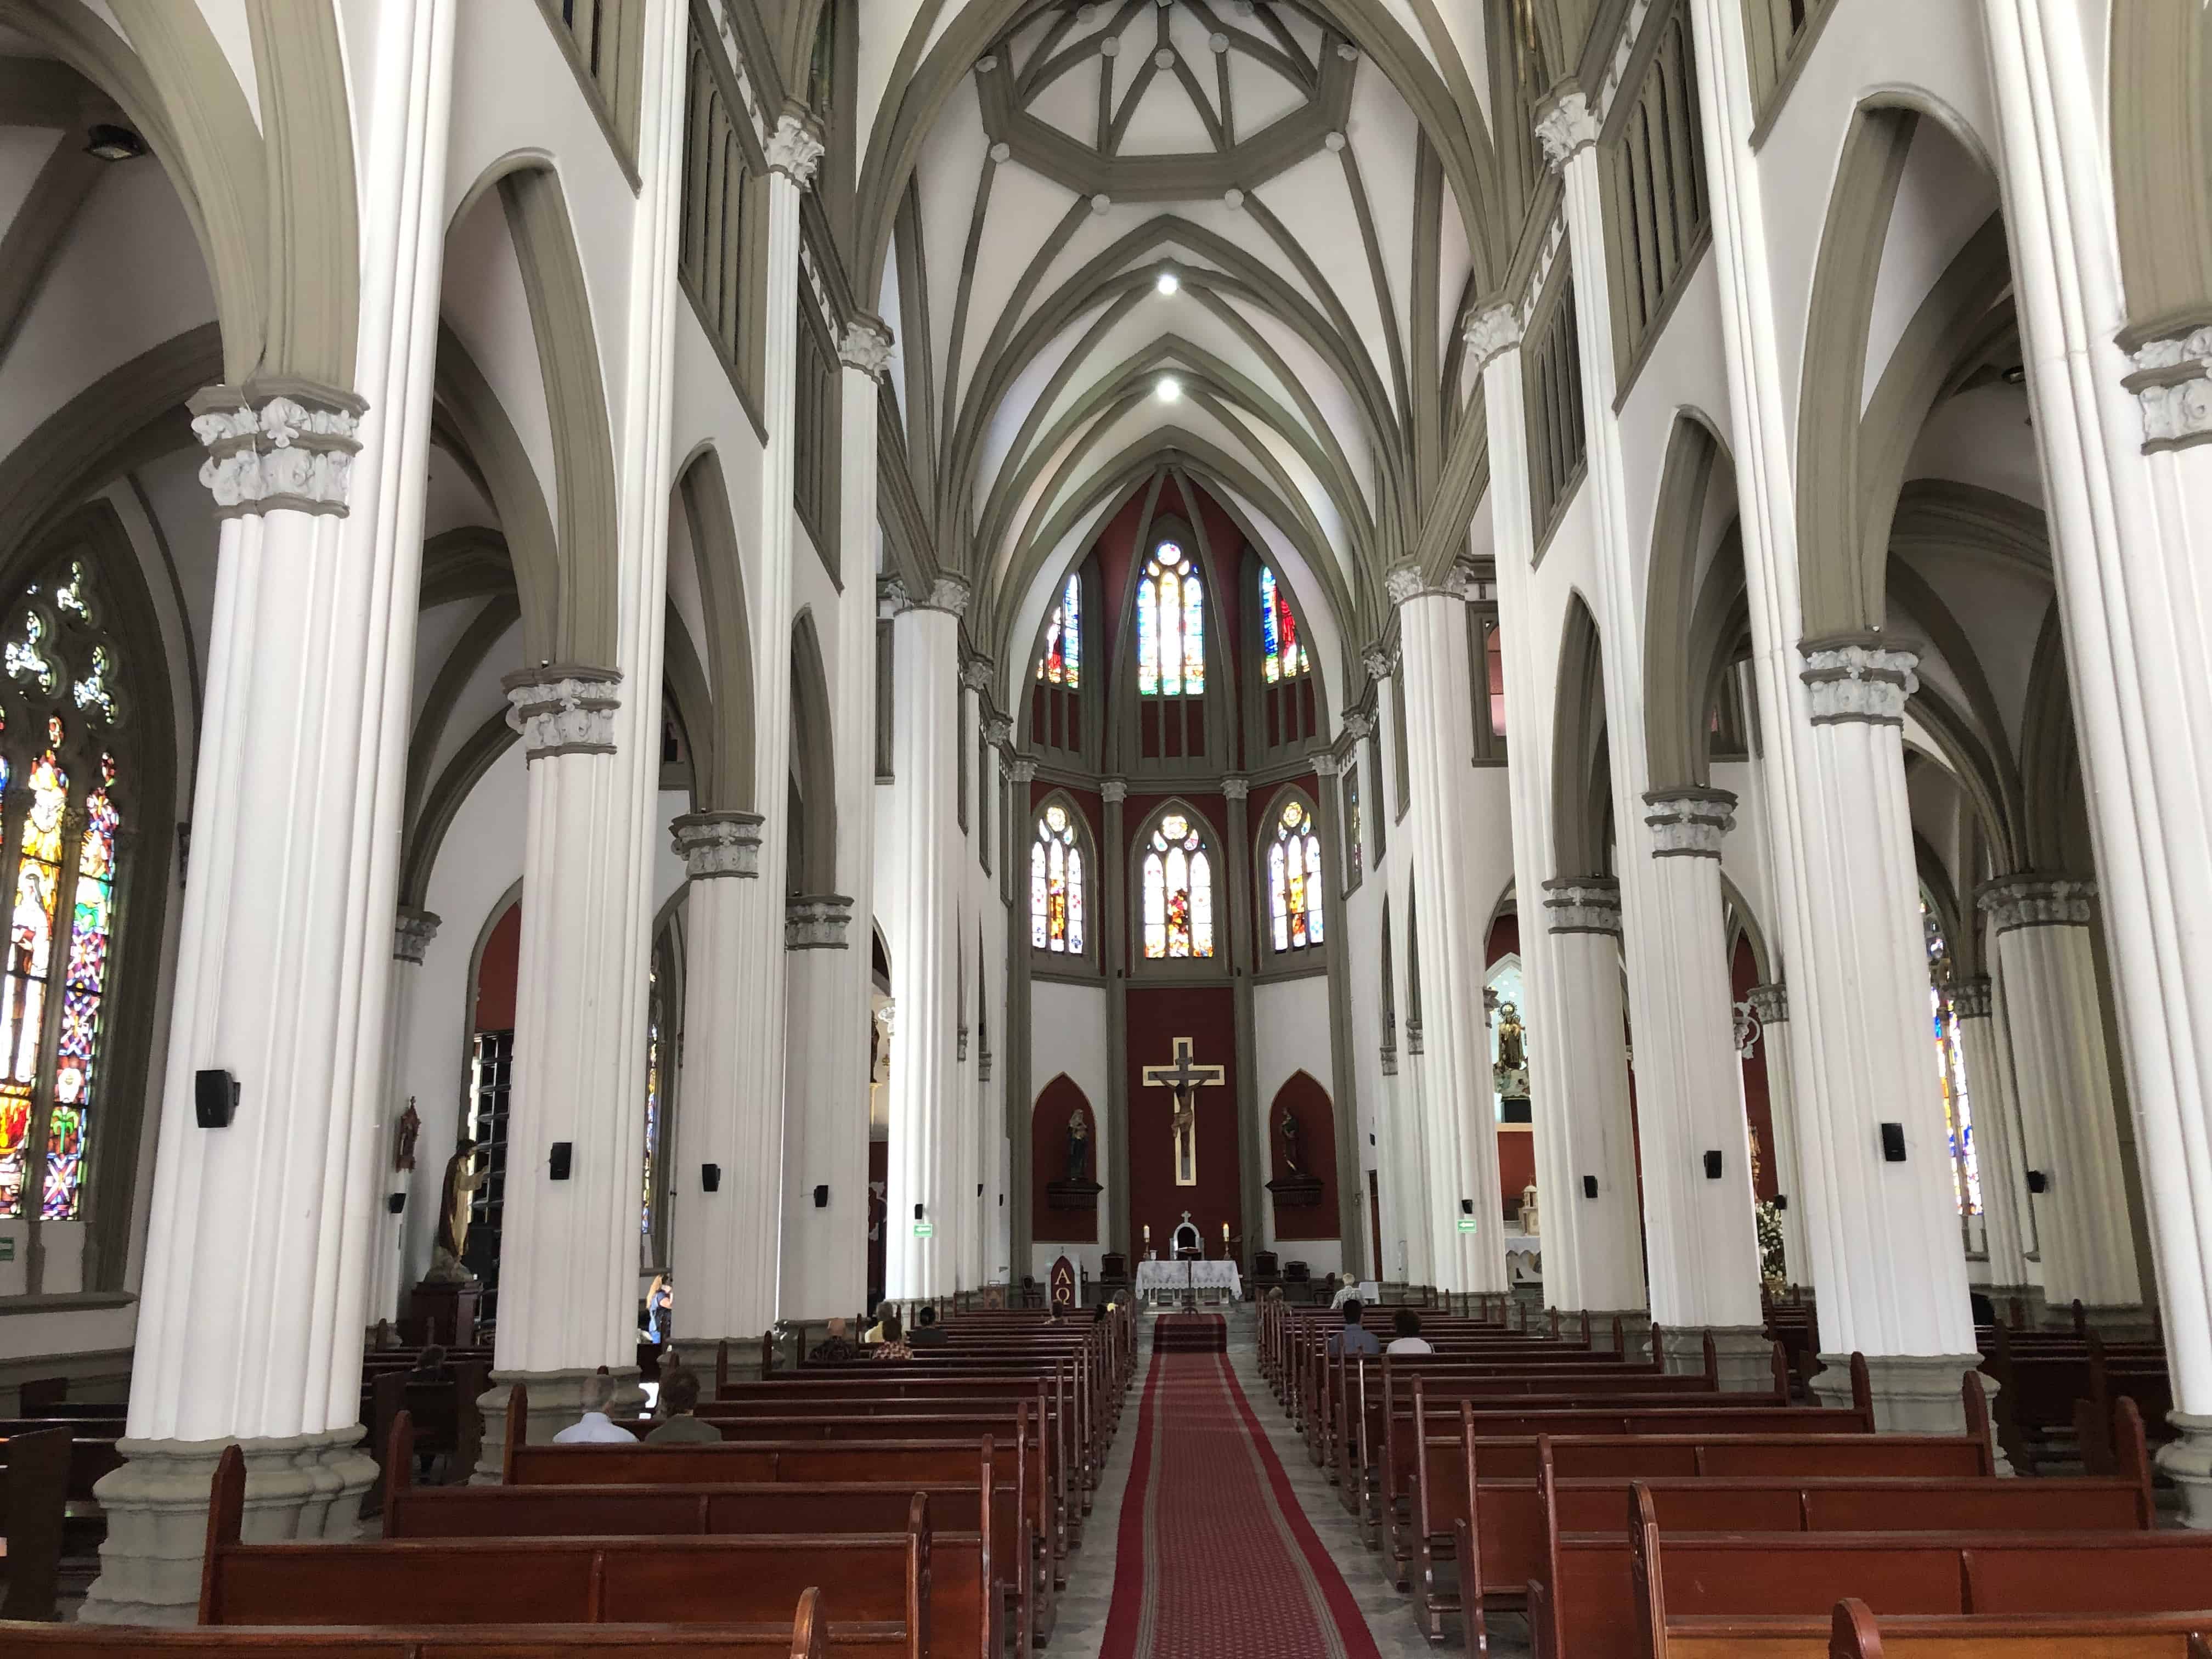 Nave of Our Lady of Mount Carmel in Pereira, Risaralda, Colombia